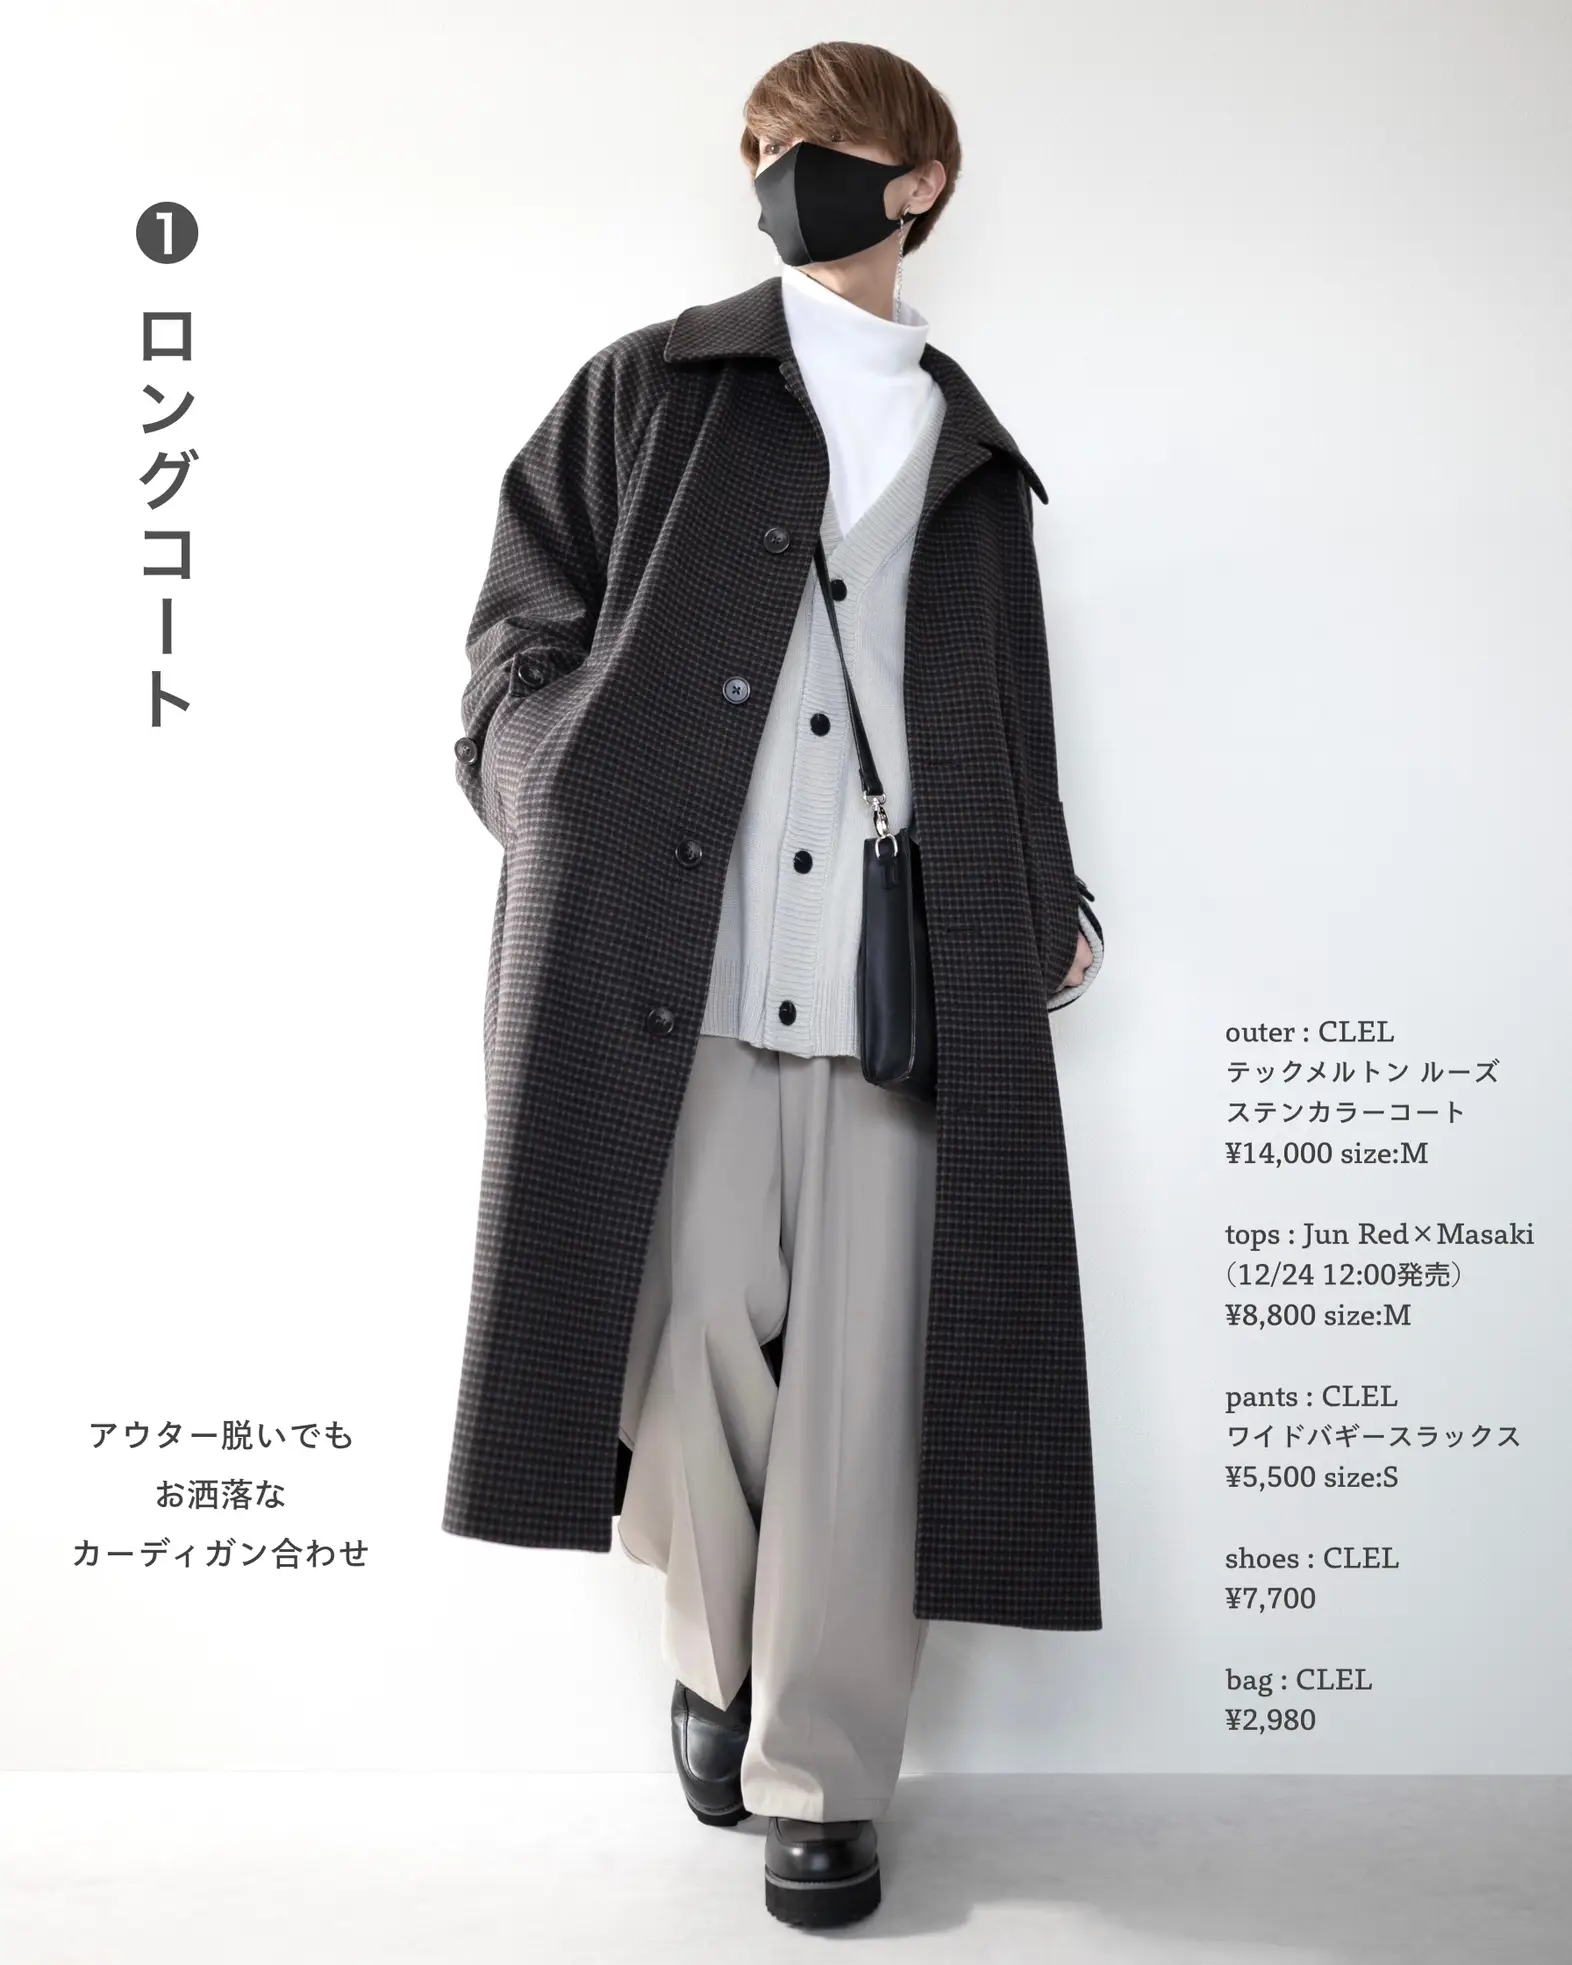 168cm Men's Winter Clothes 8 Selections | Gallery posted by MASAKI